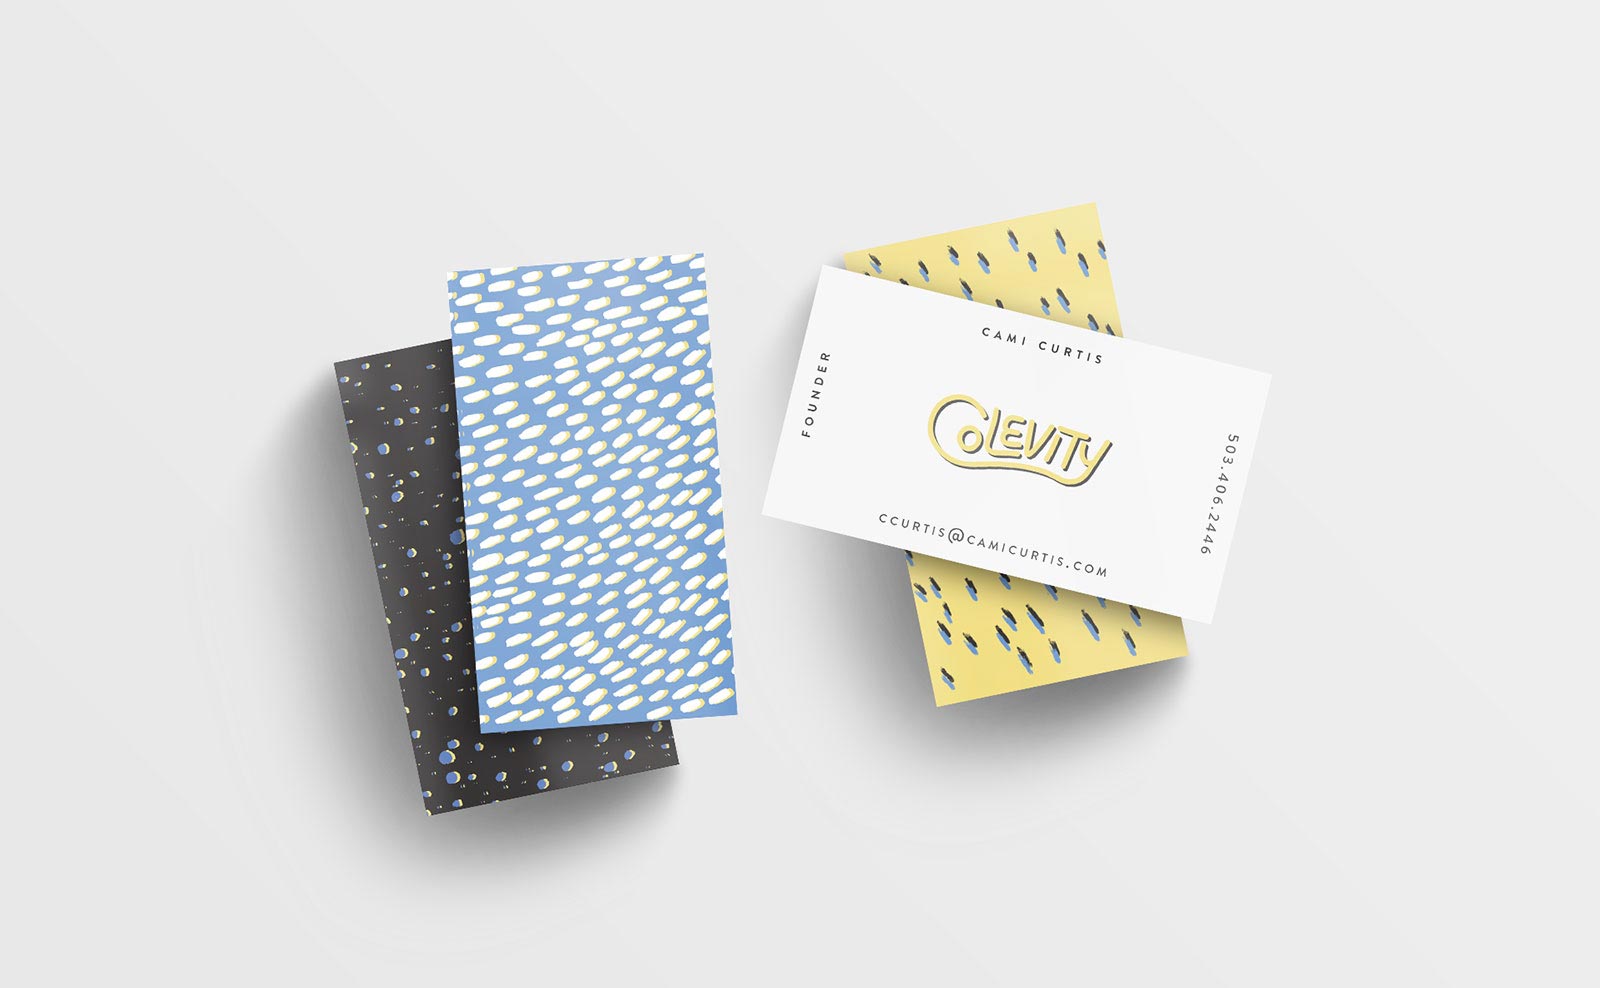 Colevity Business Cards